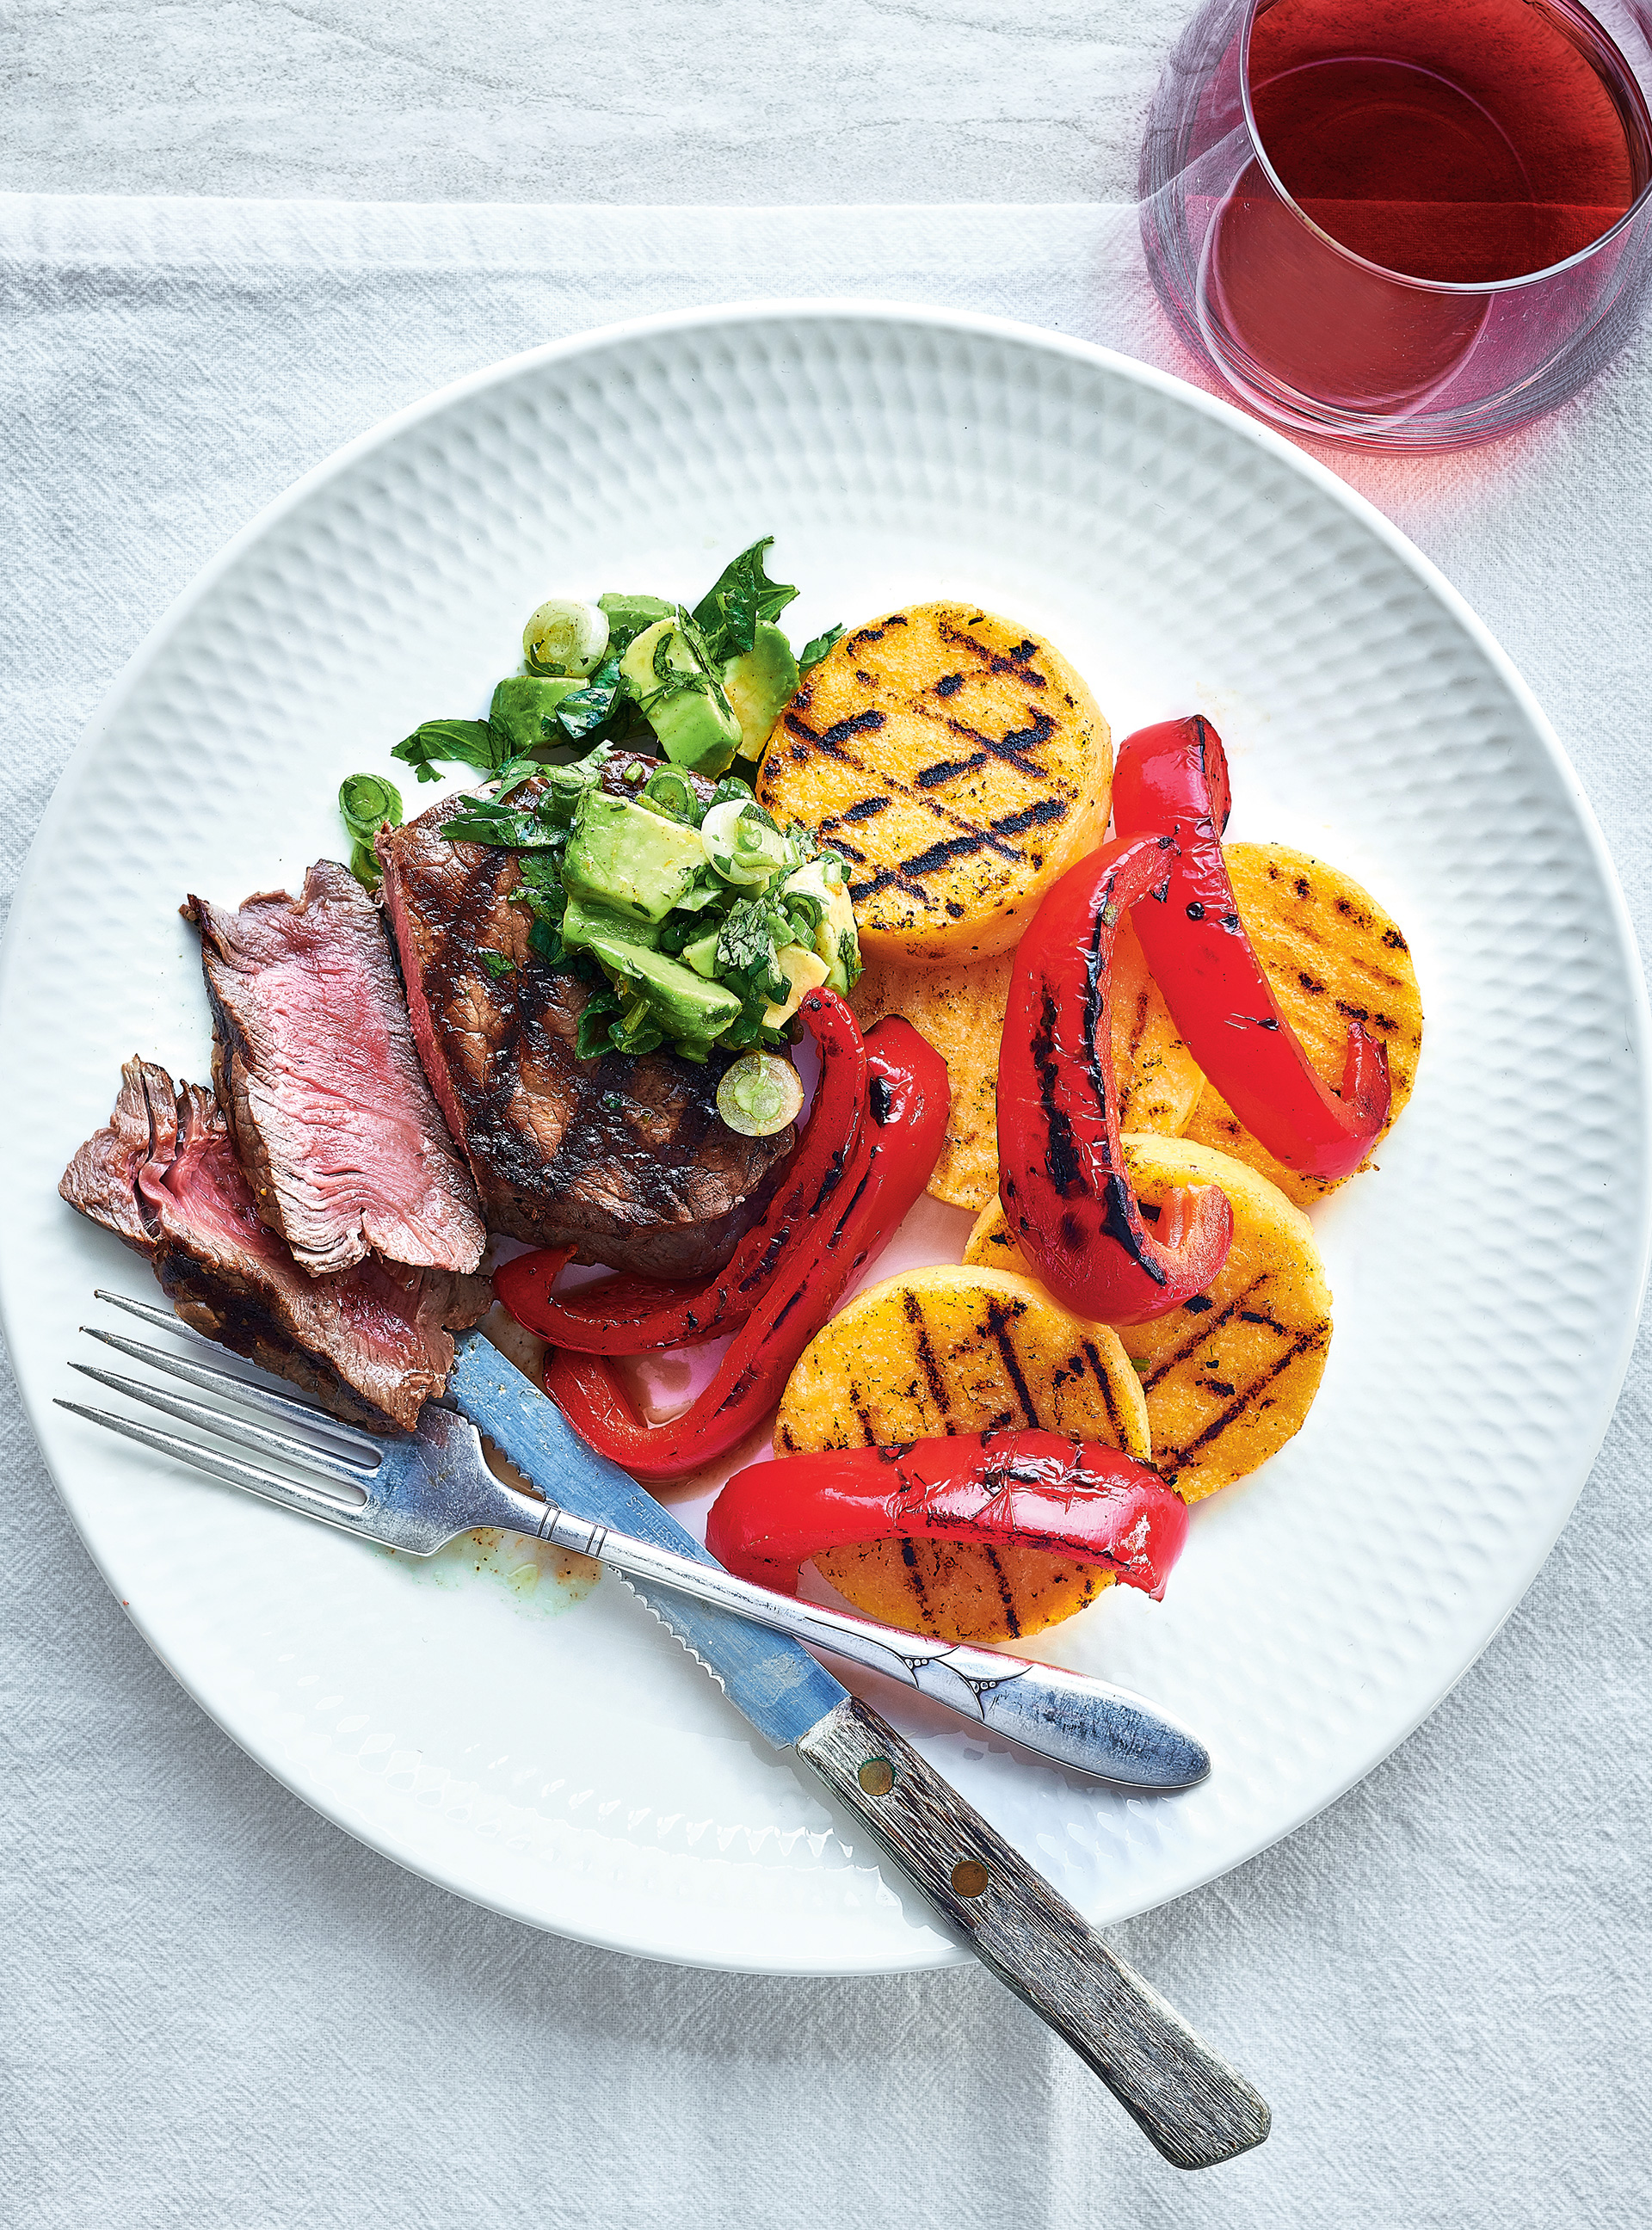 Top Sirloin Steak with Bell Peppers and Avocado Salsa